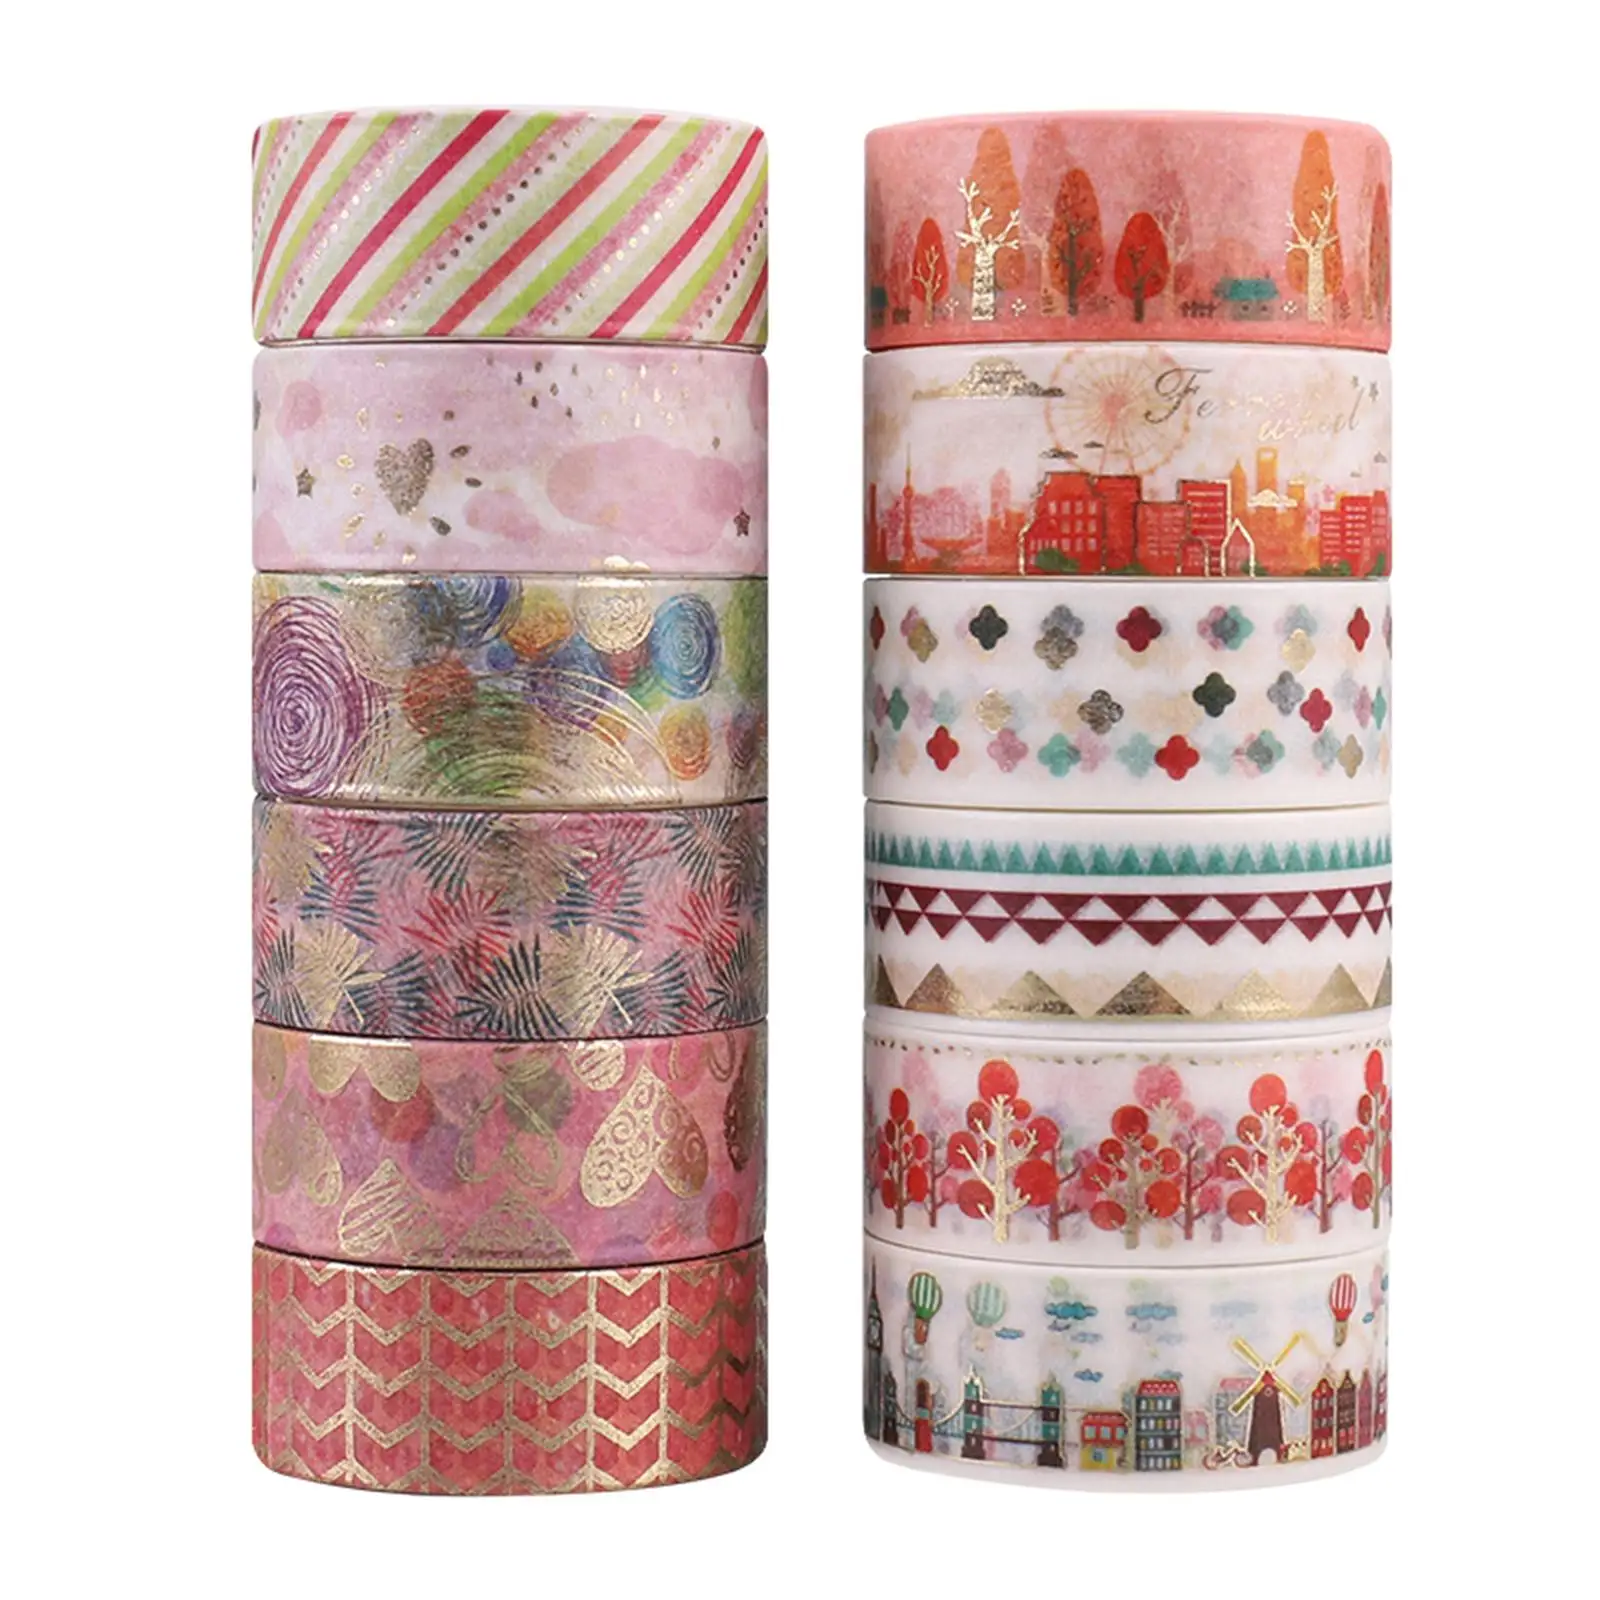 12 Rolls Washi Tape Set Gold Foil Washi Tape Crafts Masking Tapes for Gift Wrapping Journaling Party Album Scrapbooking Supplies